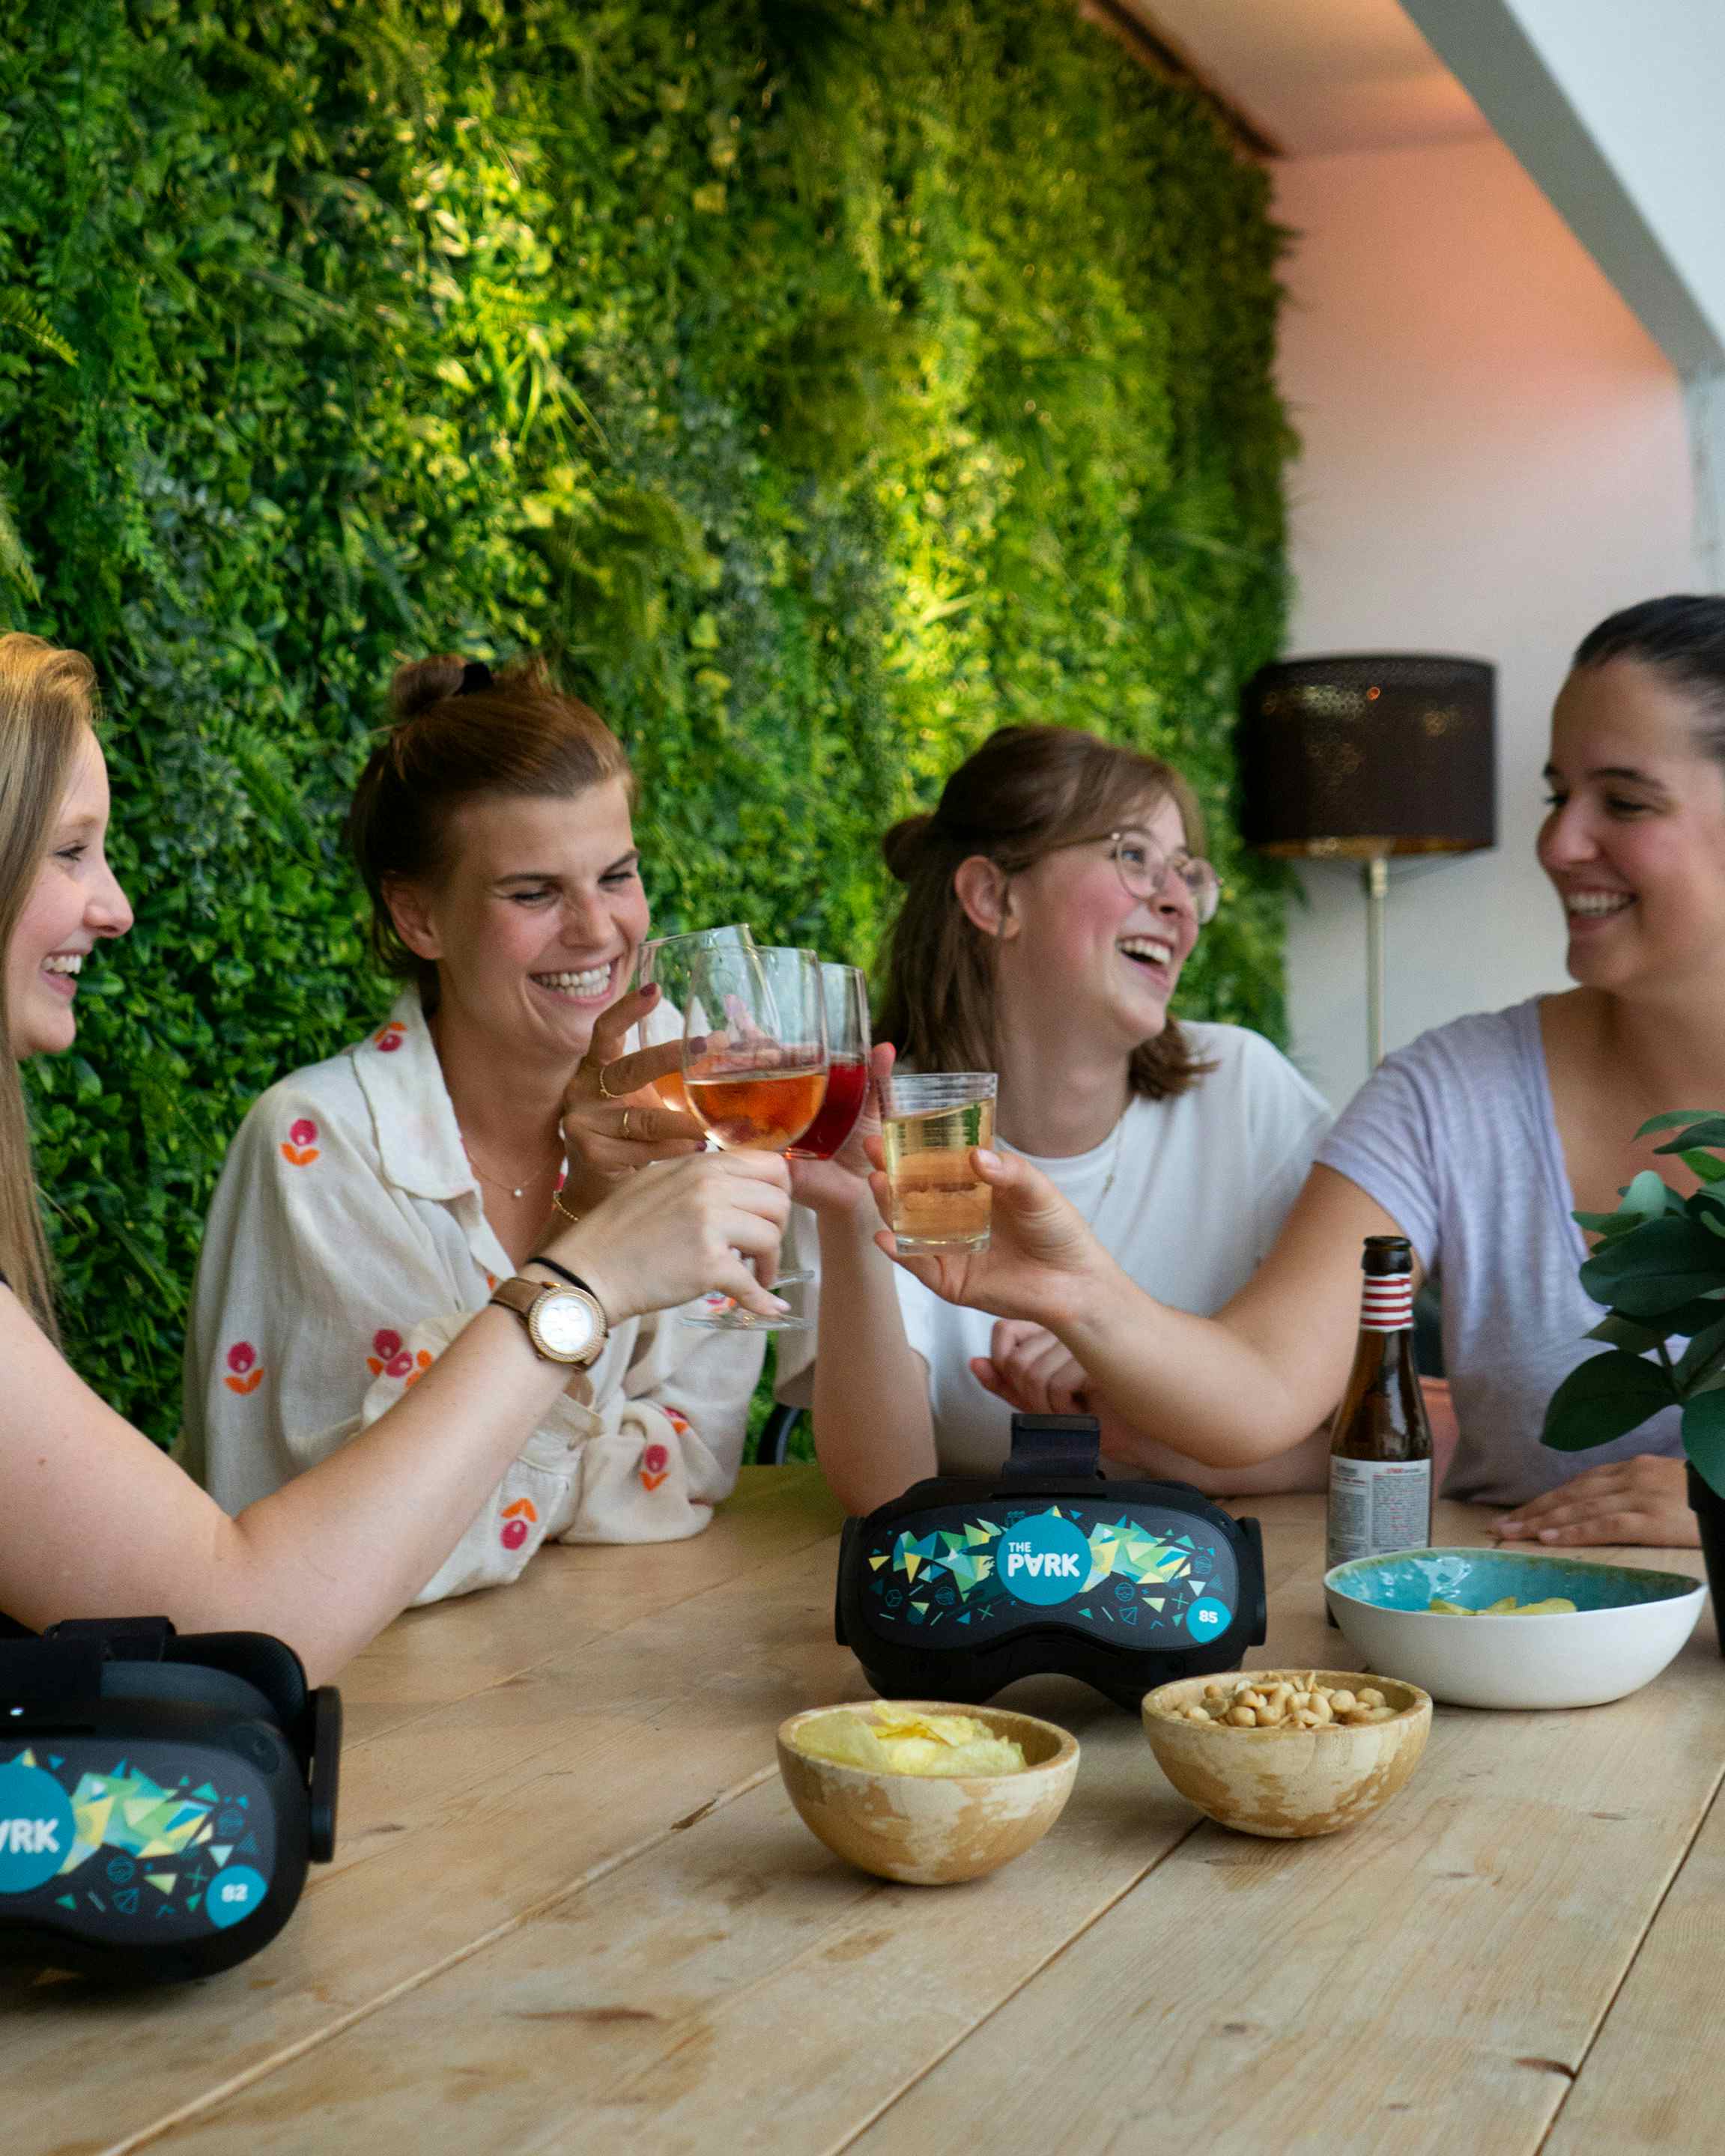 Group of women toasting glasses while laughing